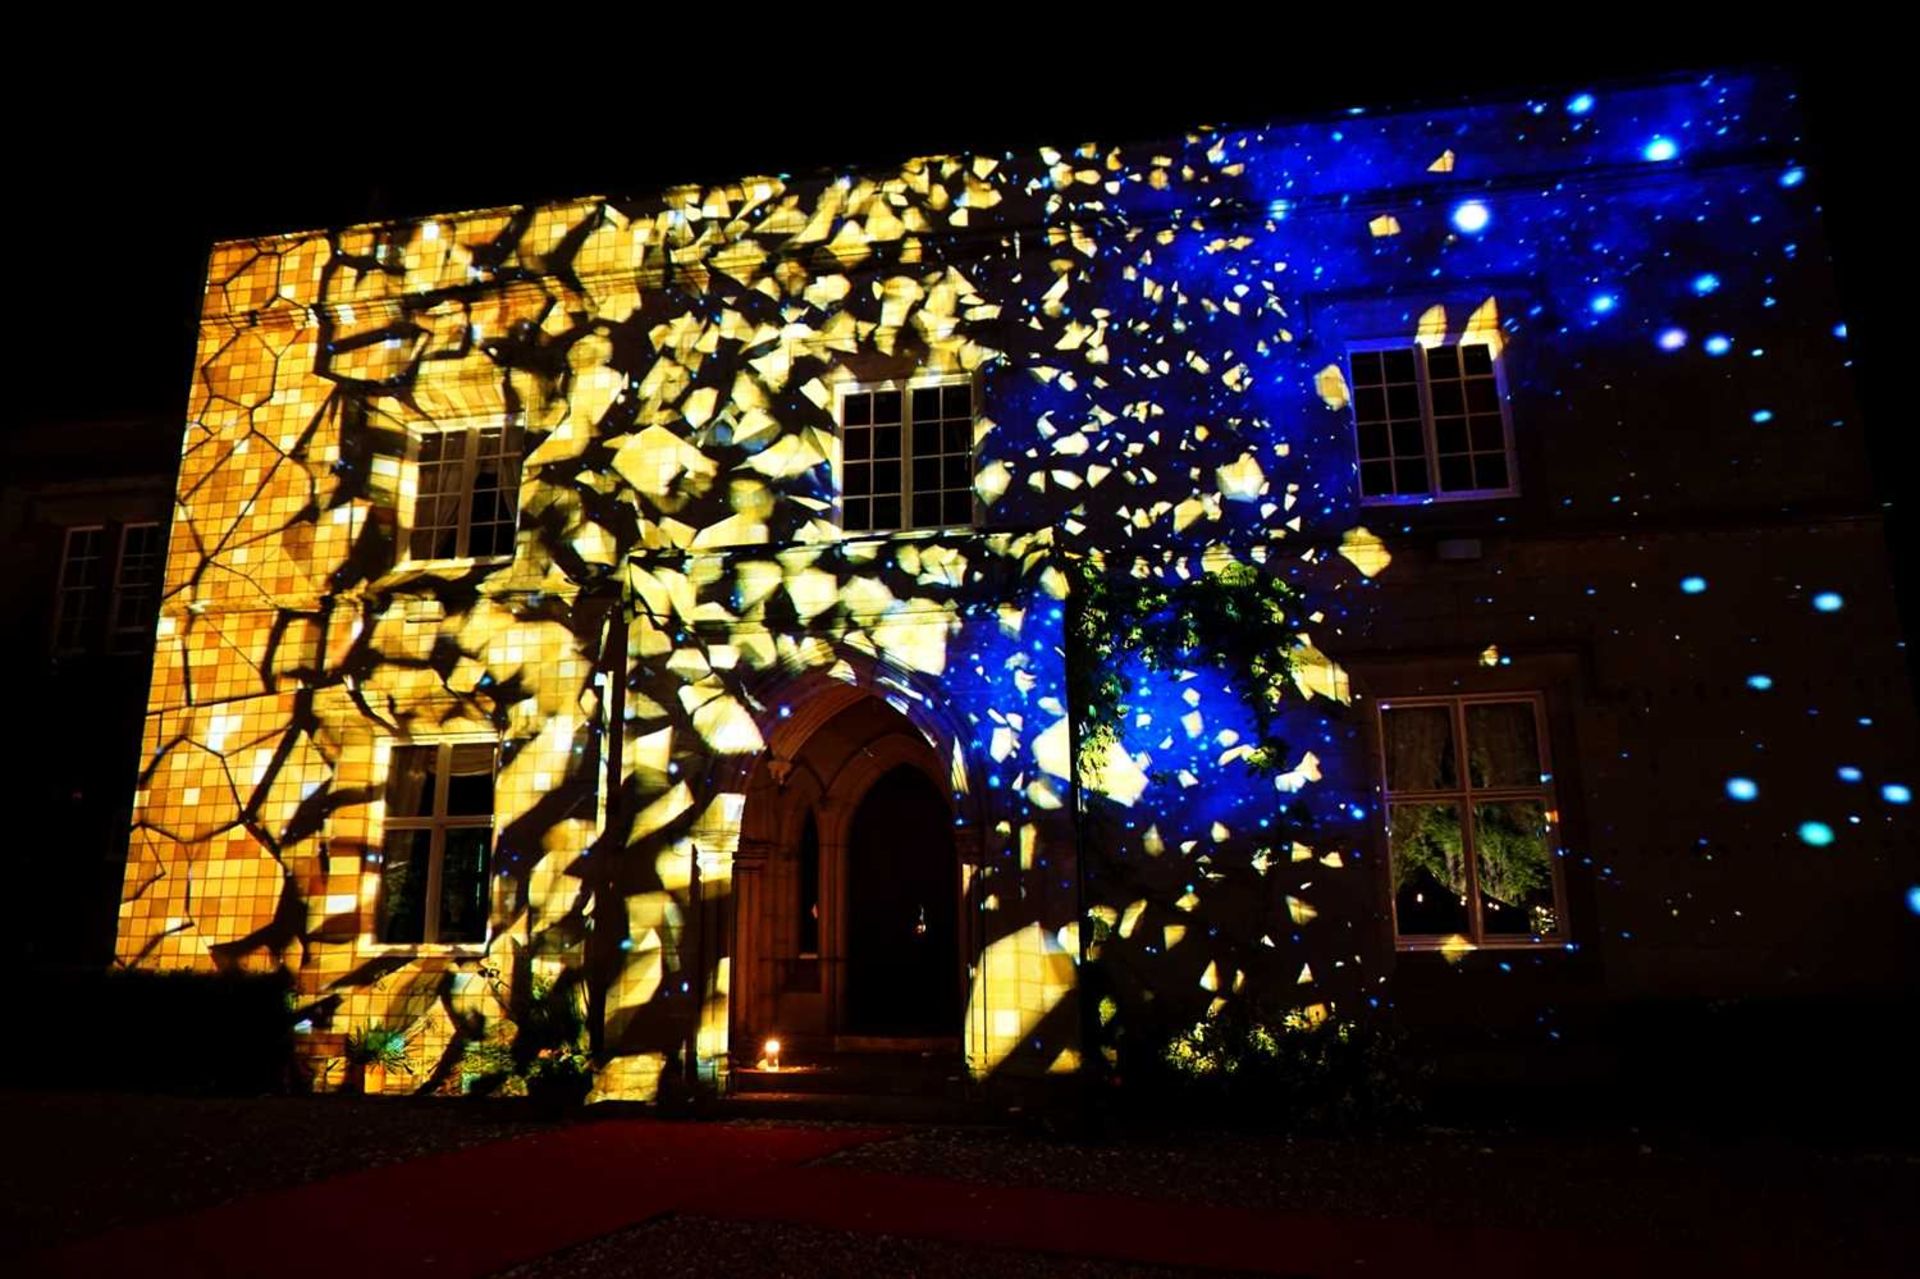 Pop up projection to add wow to your event. Projection mapping has many advantages, but what makes